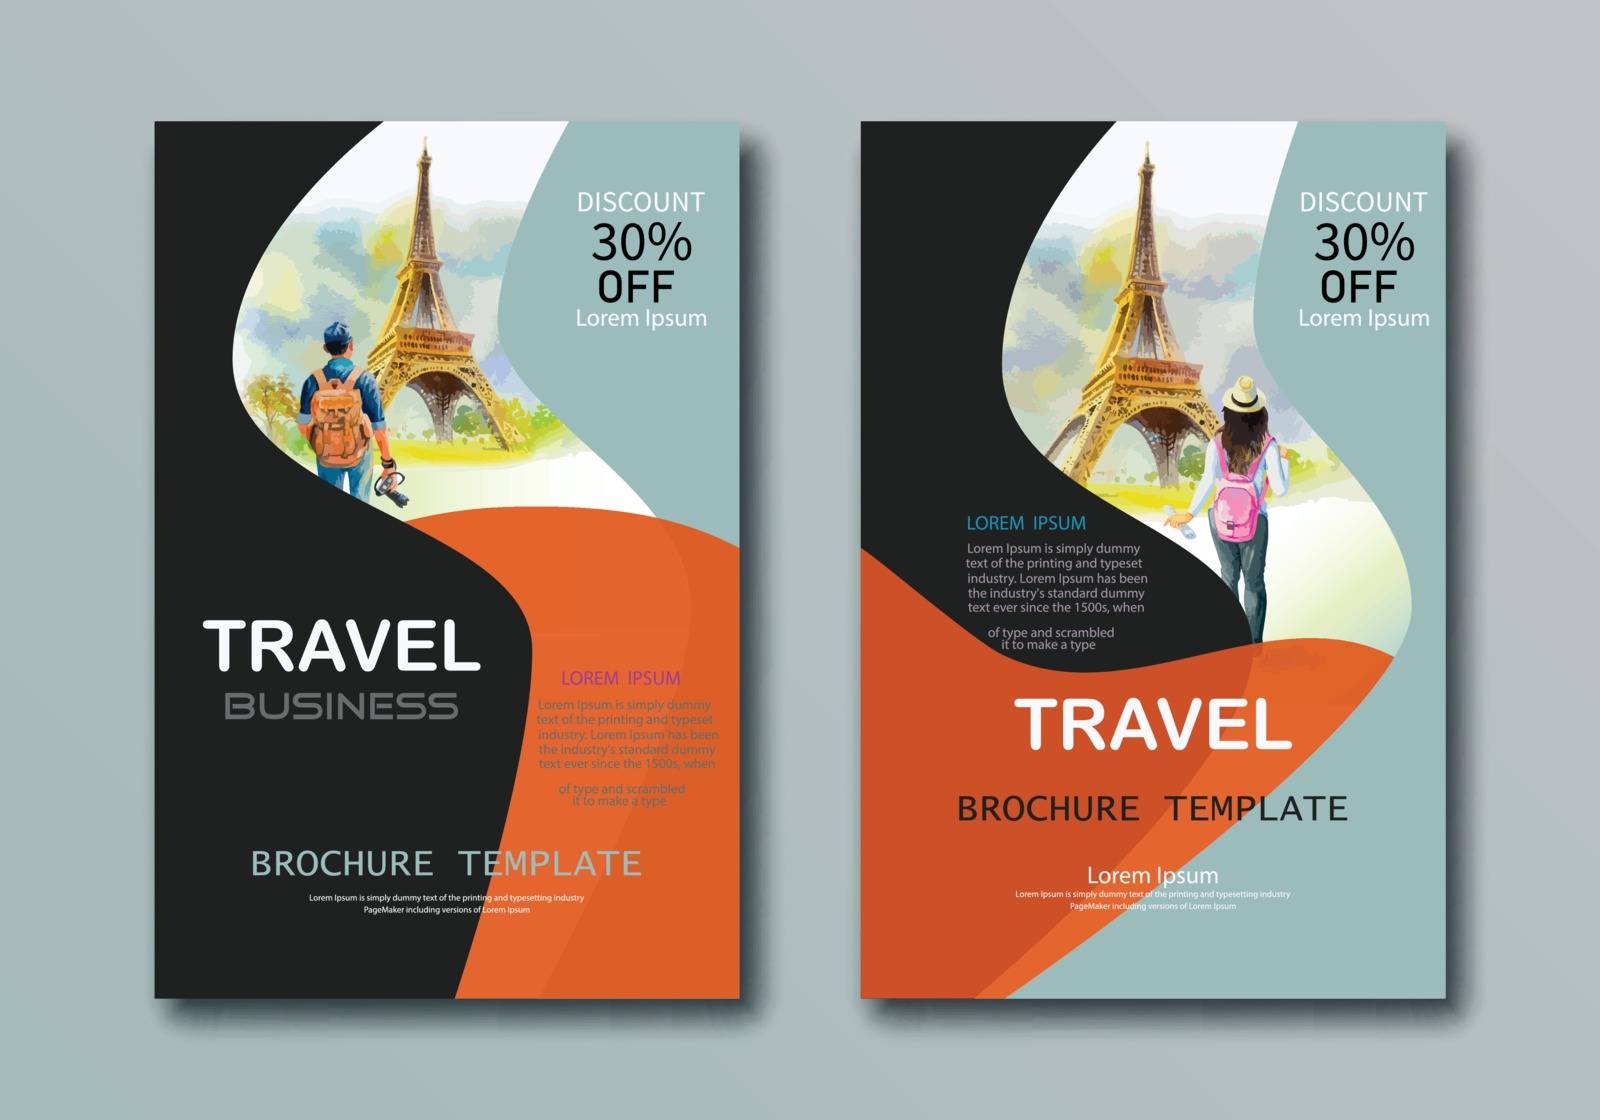 Sample presentation brochure cover design layout space for travel business, Advertising design with watercolor background, Vector illustration template in A4 size for catalog, newsletter, website.